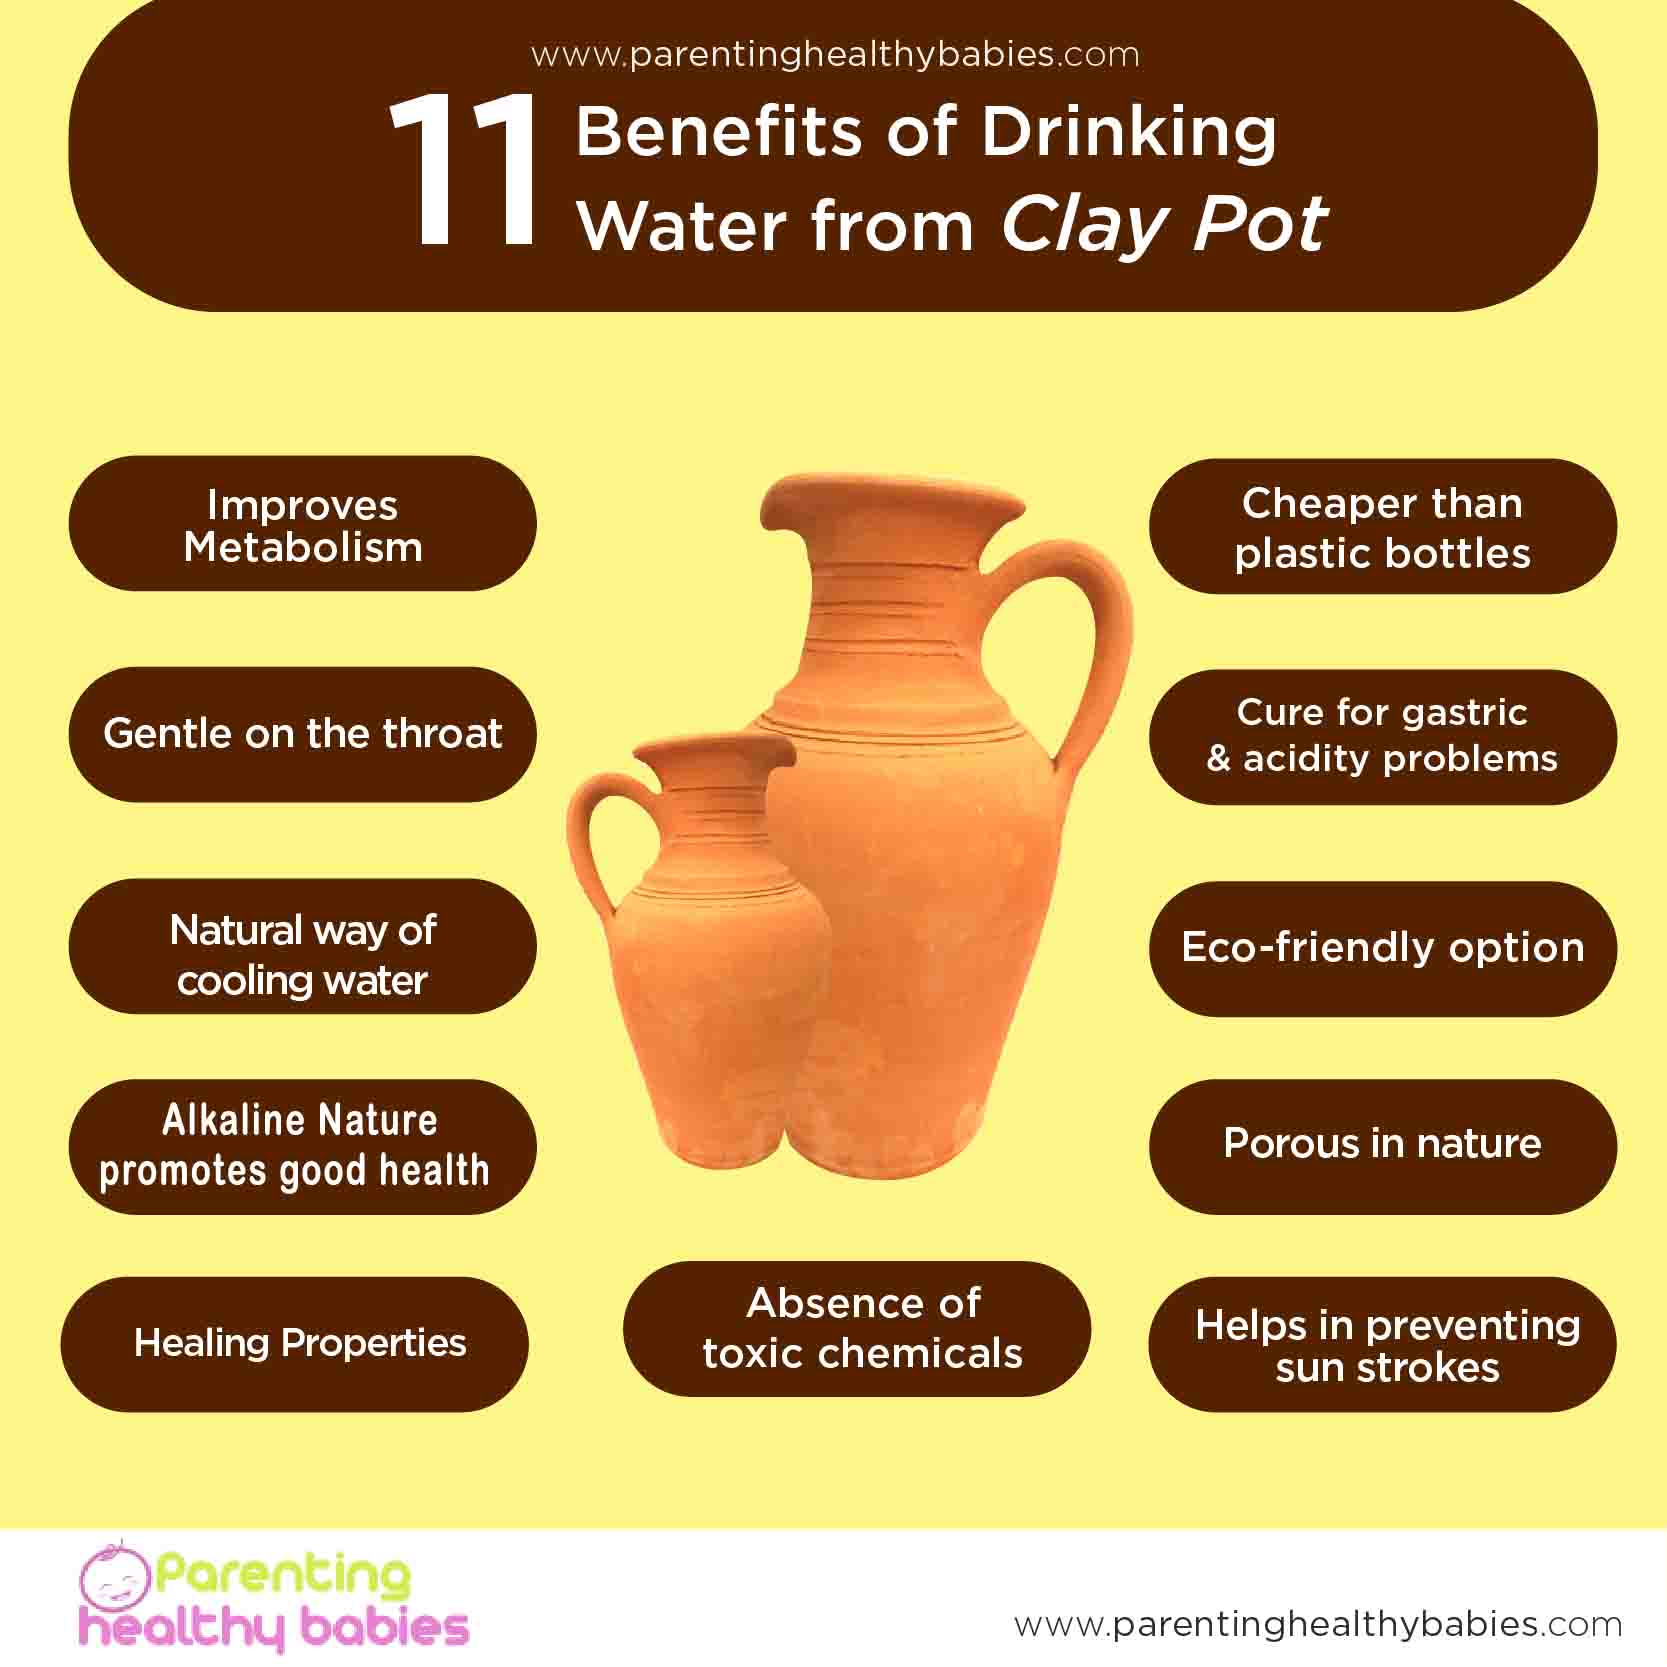 Benefits of Drinking water from clay pot